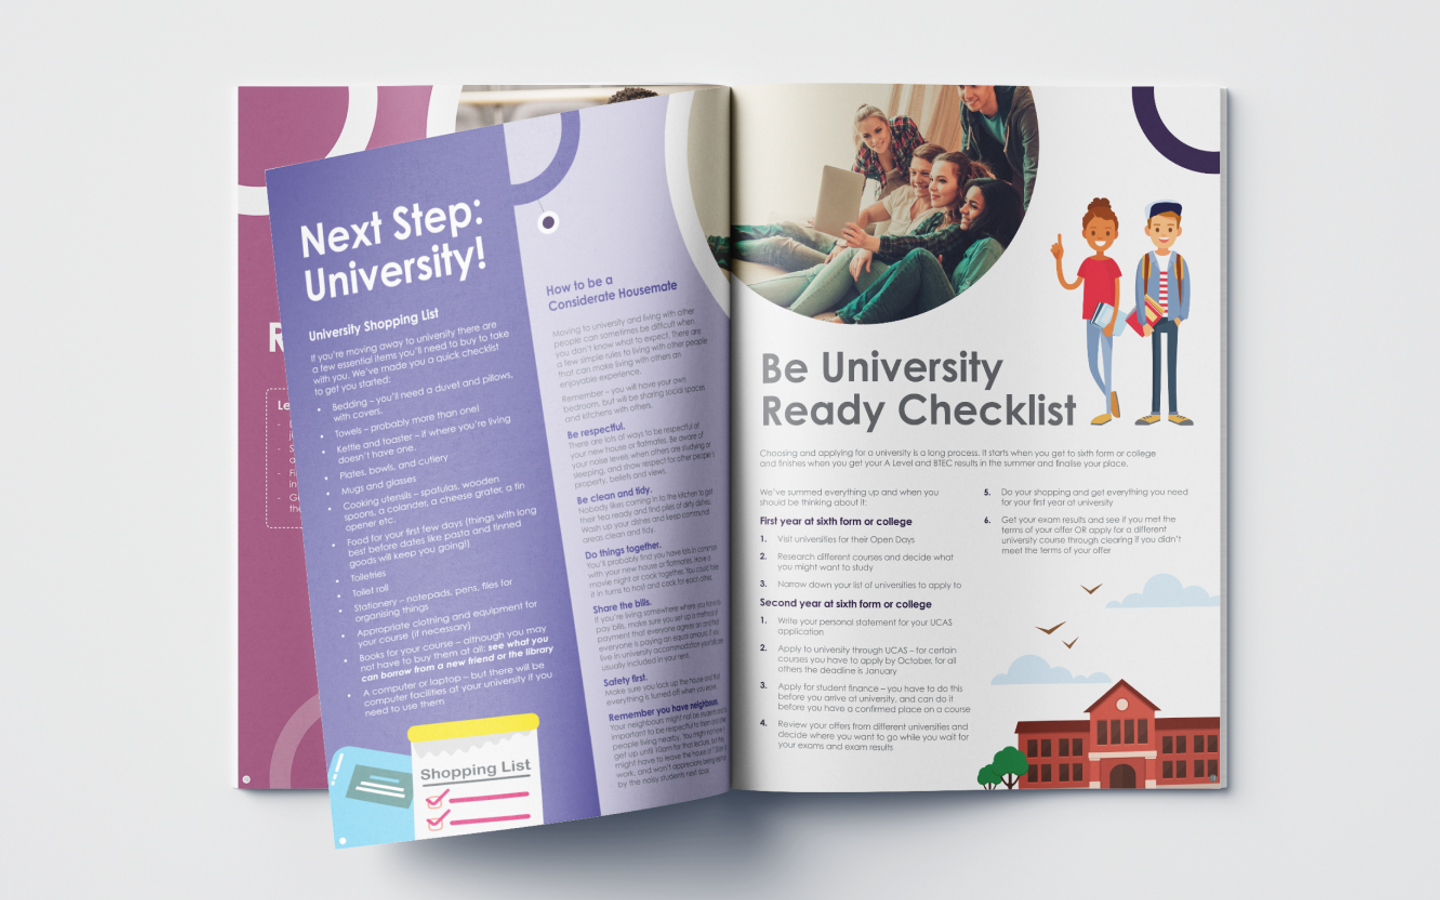 Open brochure detailing preparation for university with a shopping list and readiness checklist, alongside illustrations of students and university life.